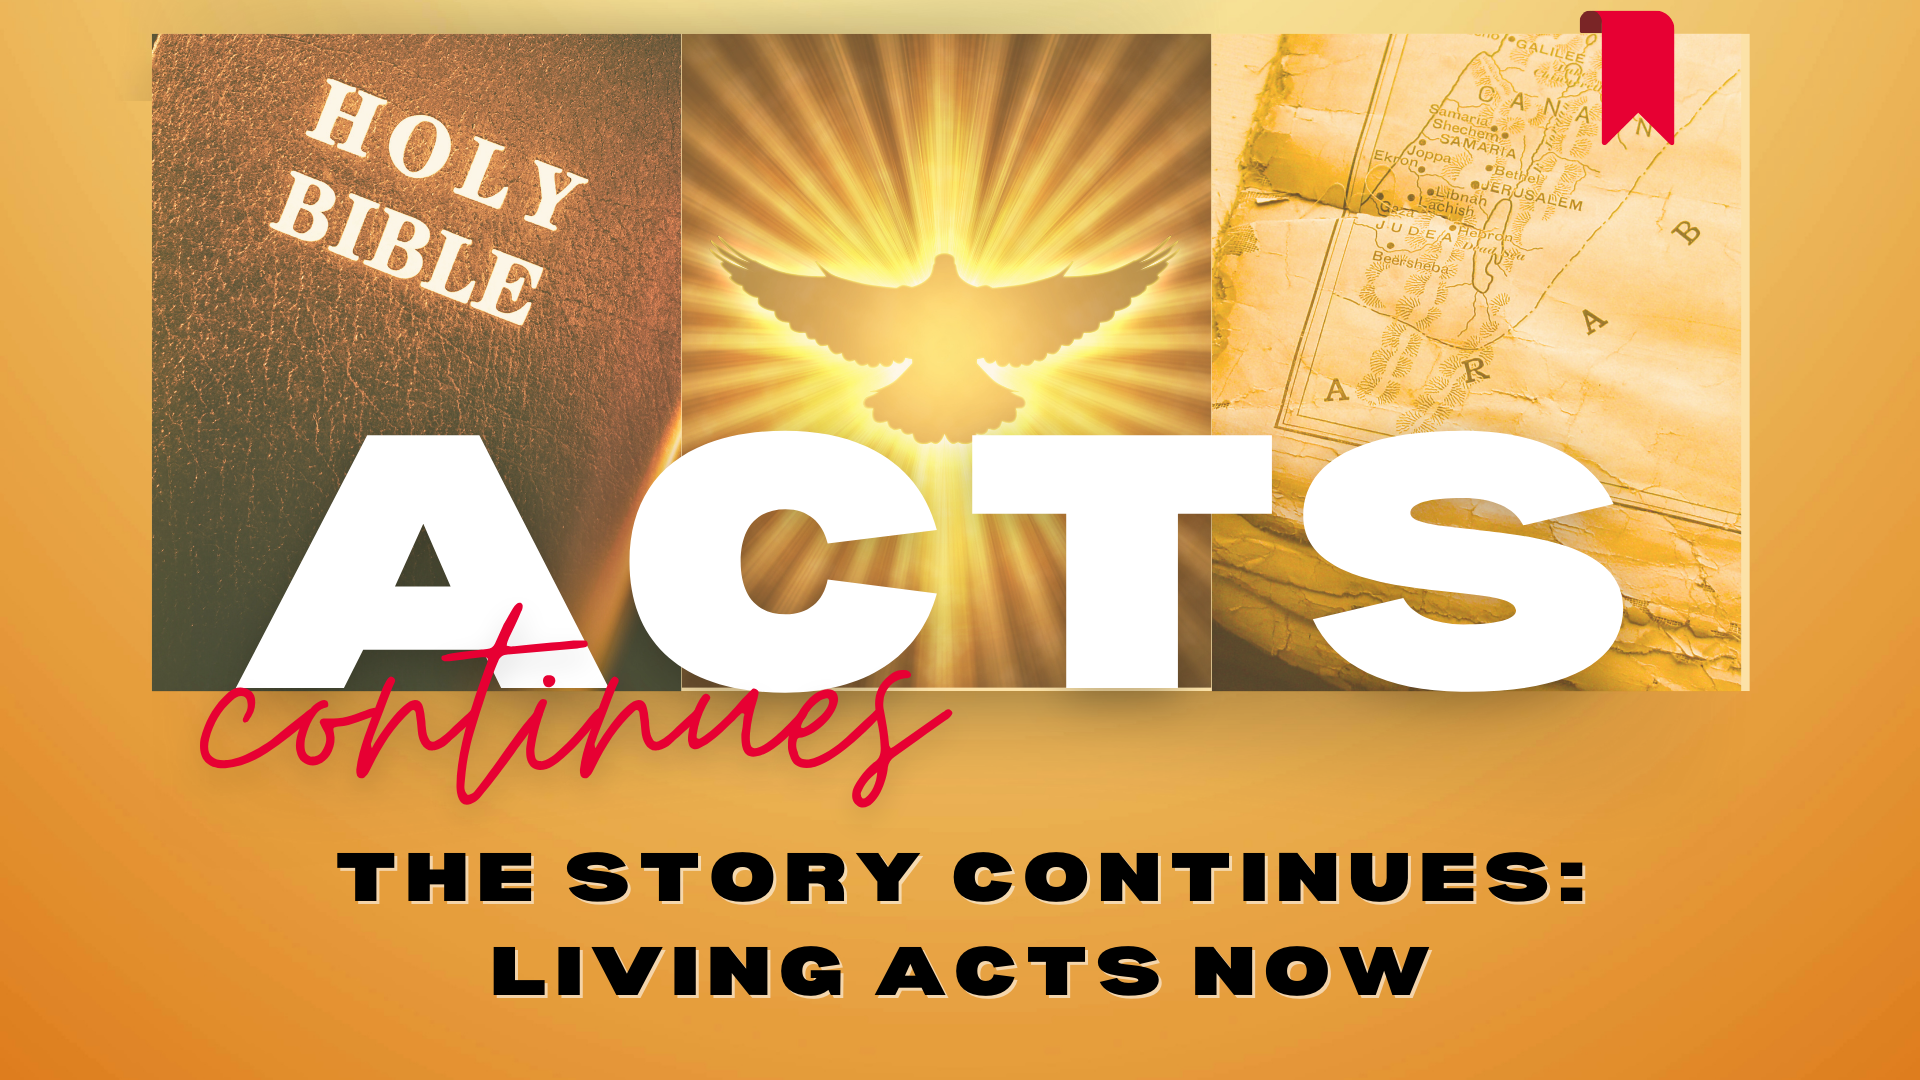 The Story Continues: Living Acts Now